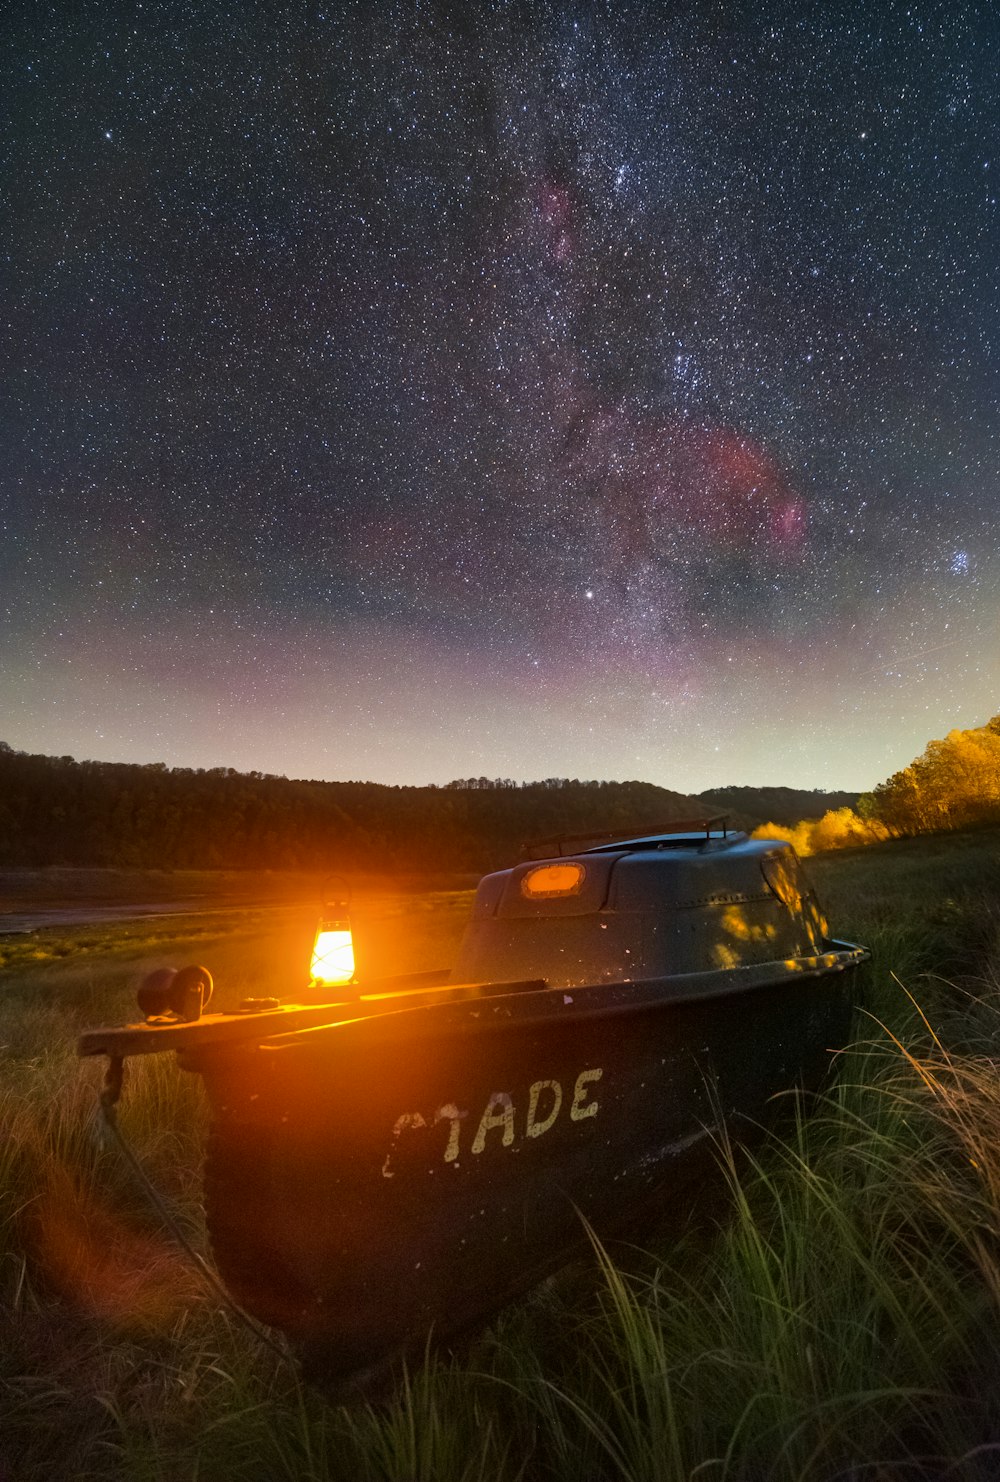 a boat sitting on top of a lush green field under a night sky